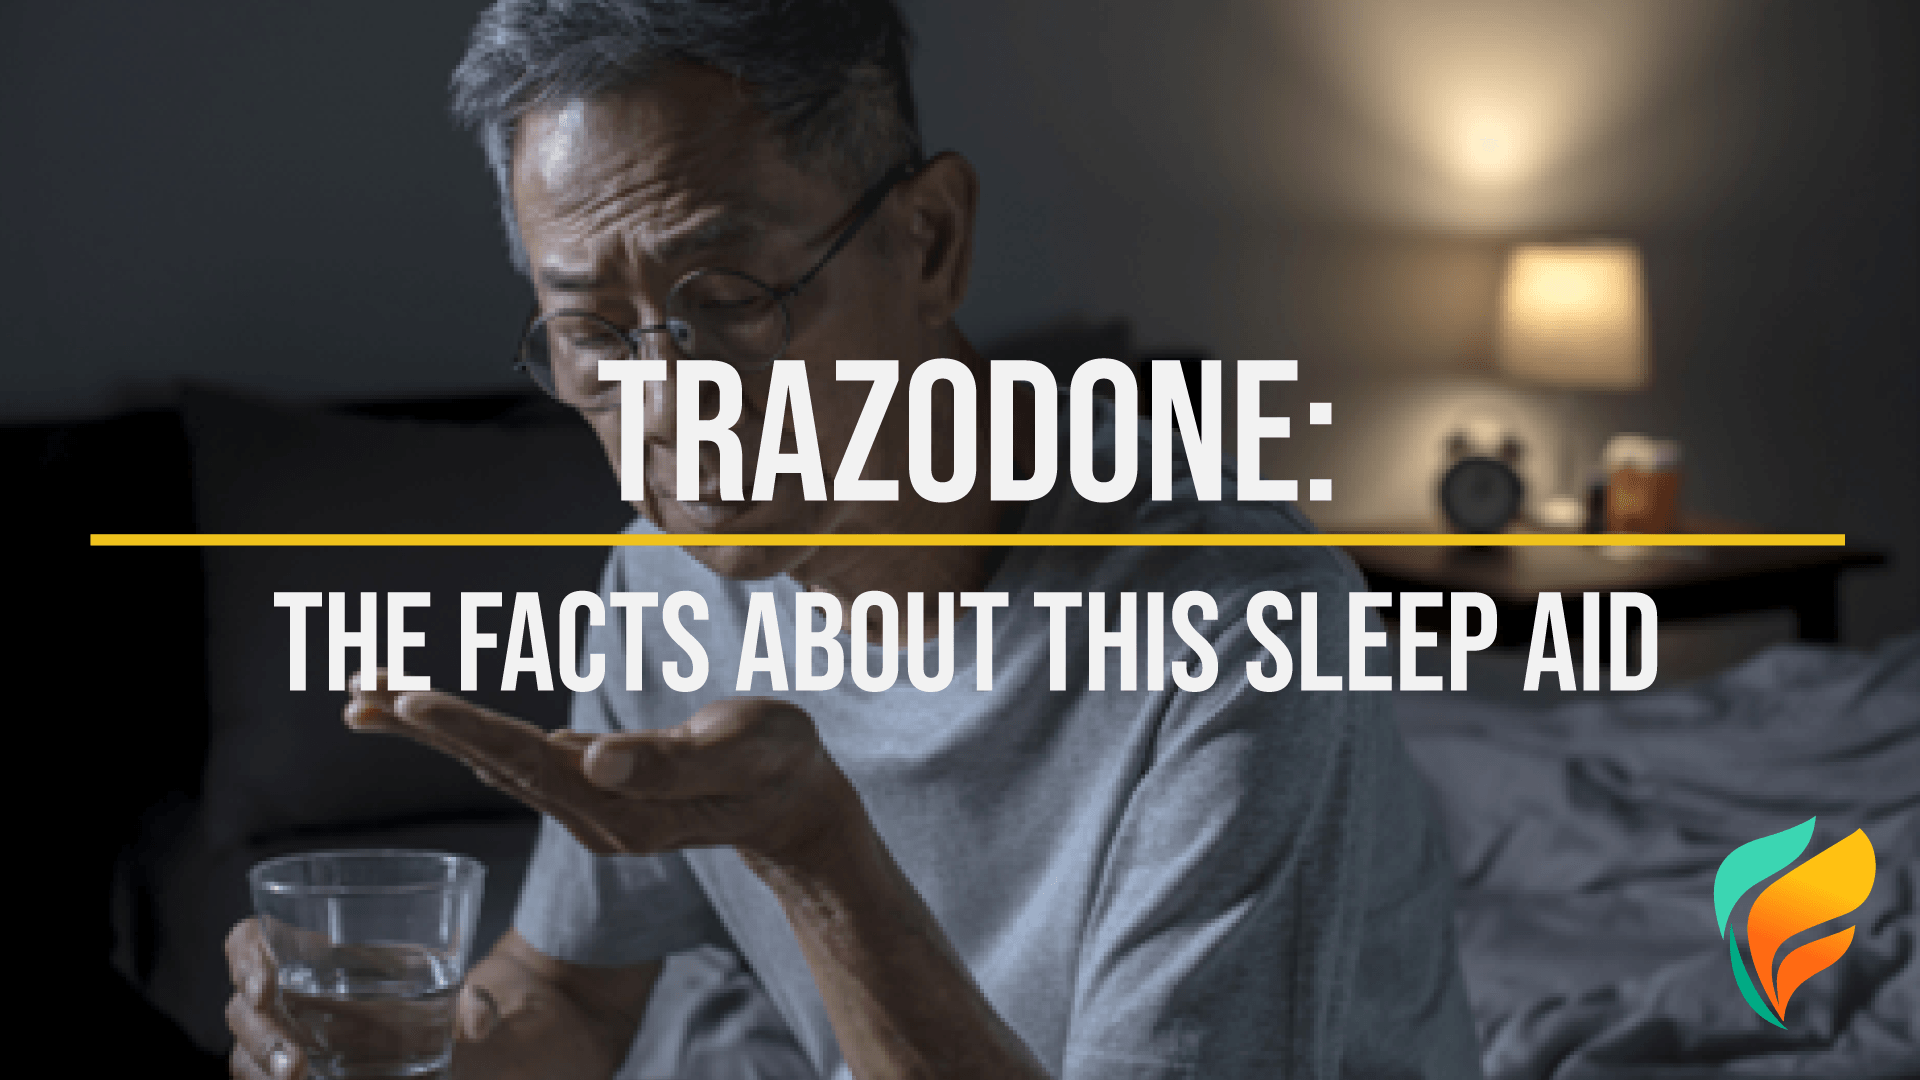 Trazodone for Sleep: The Facts About this Risky Sleep Aid